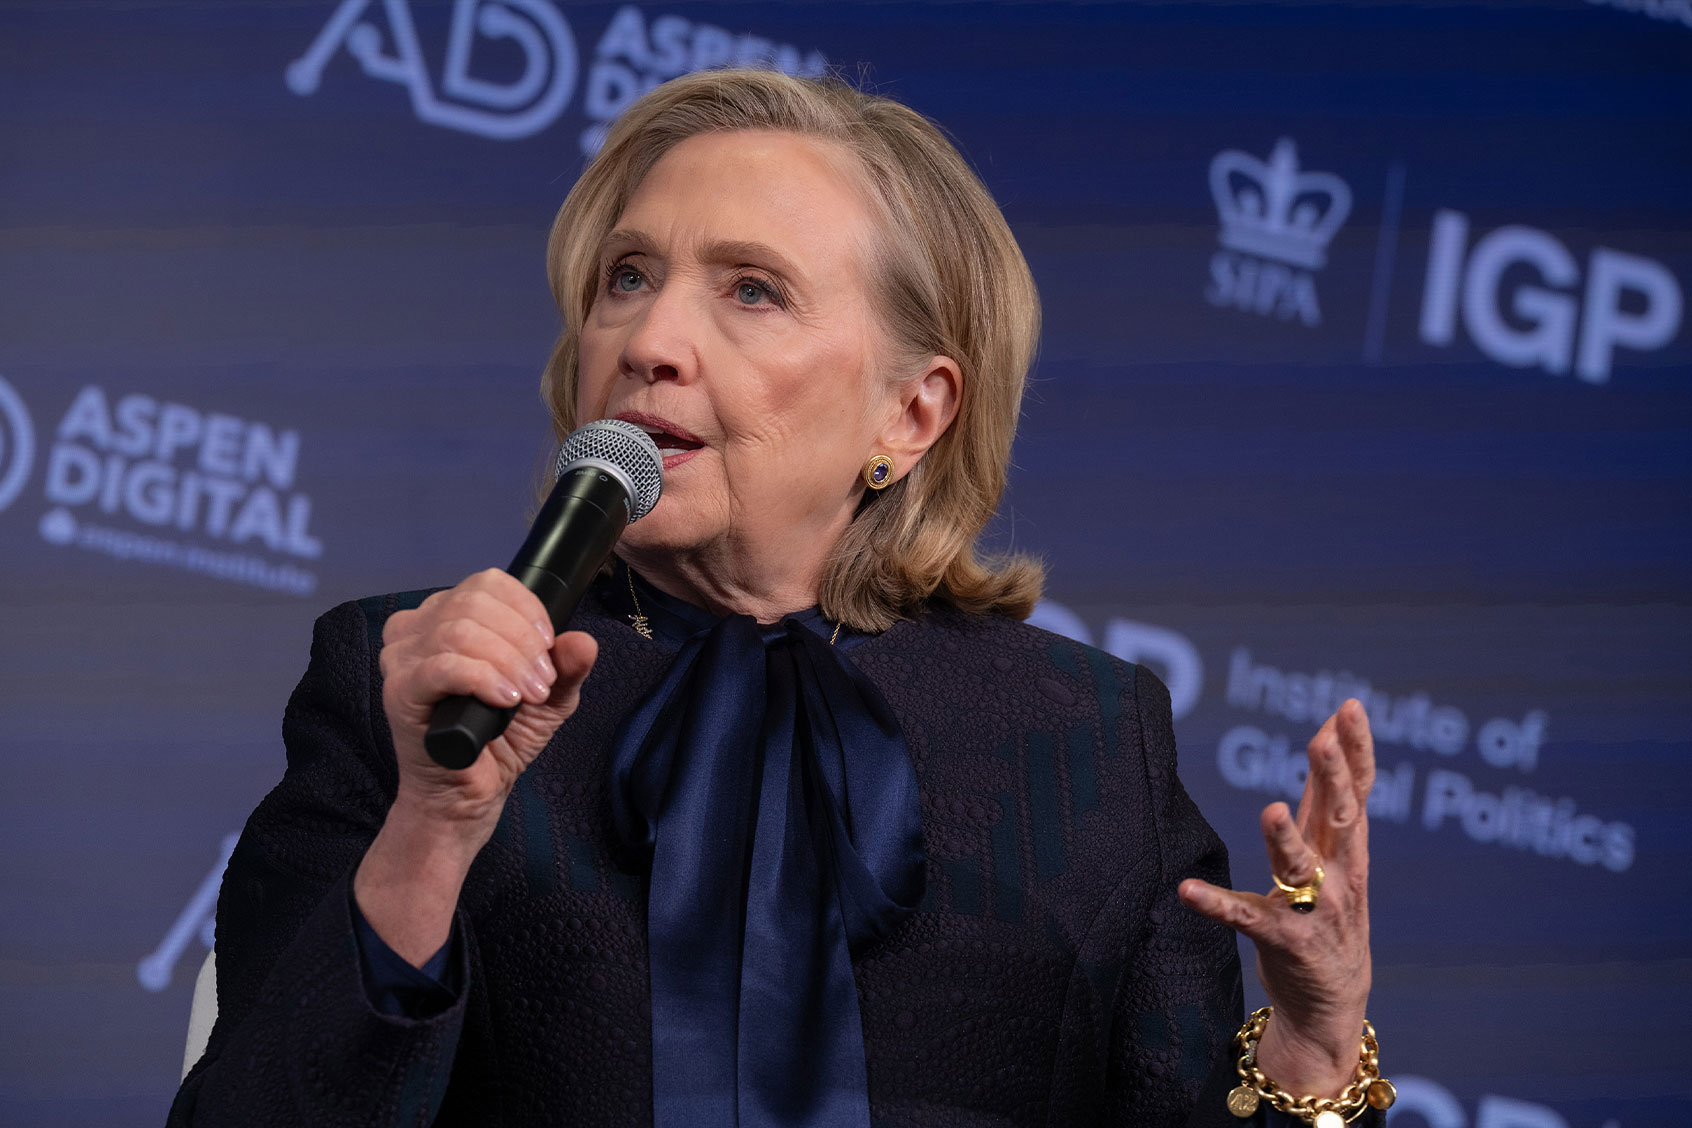 “Get over yourself,” Hillary Clinton tells apathetic voters upset about Biden and Trump rematch